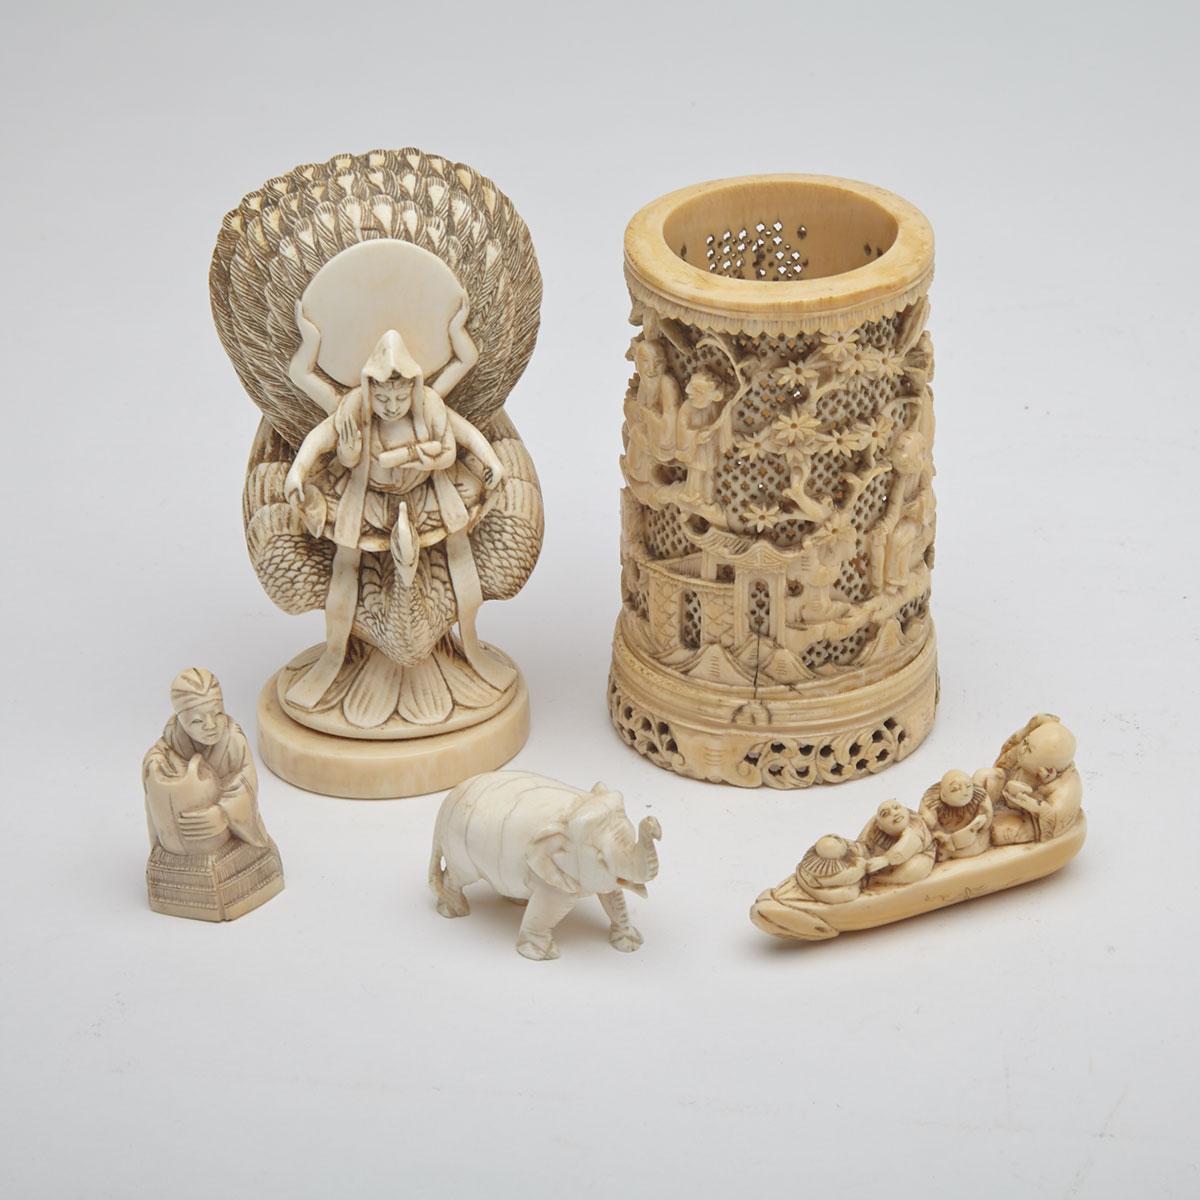 Group of Five Ivory Carvings, Early 20th Century